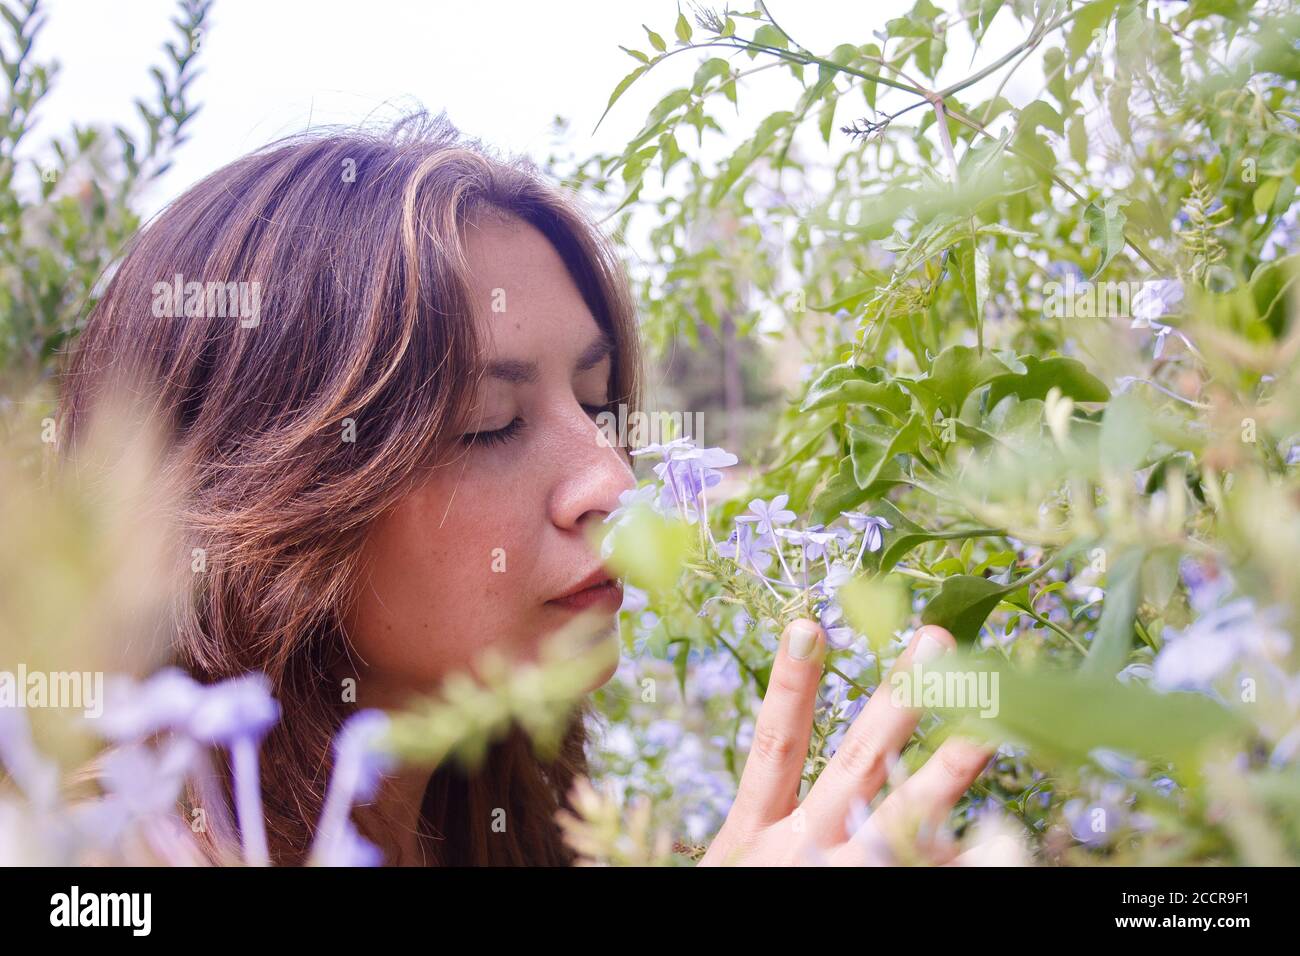 Young woman smelling wildflowers. Close-up. Horizontal view. Stock Photo